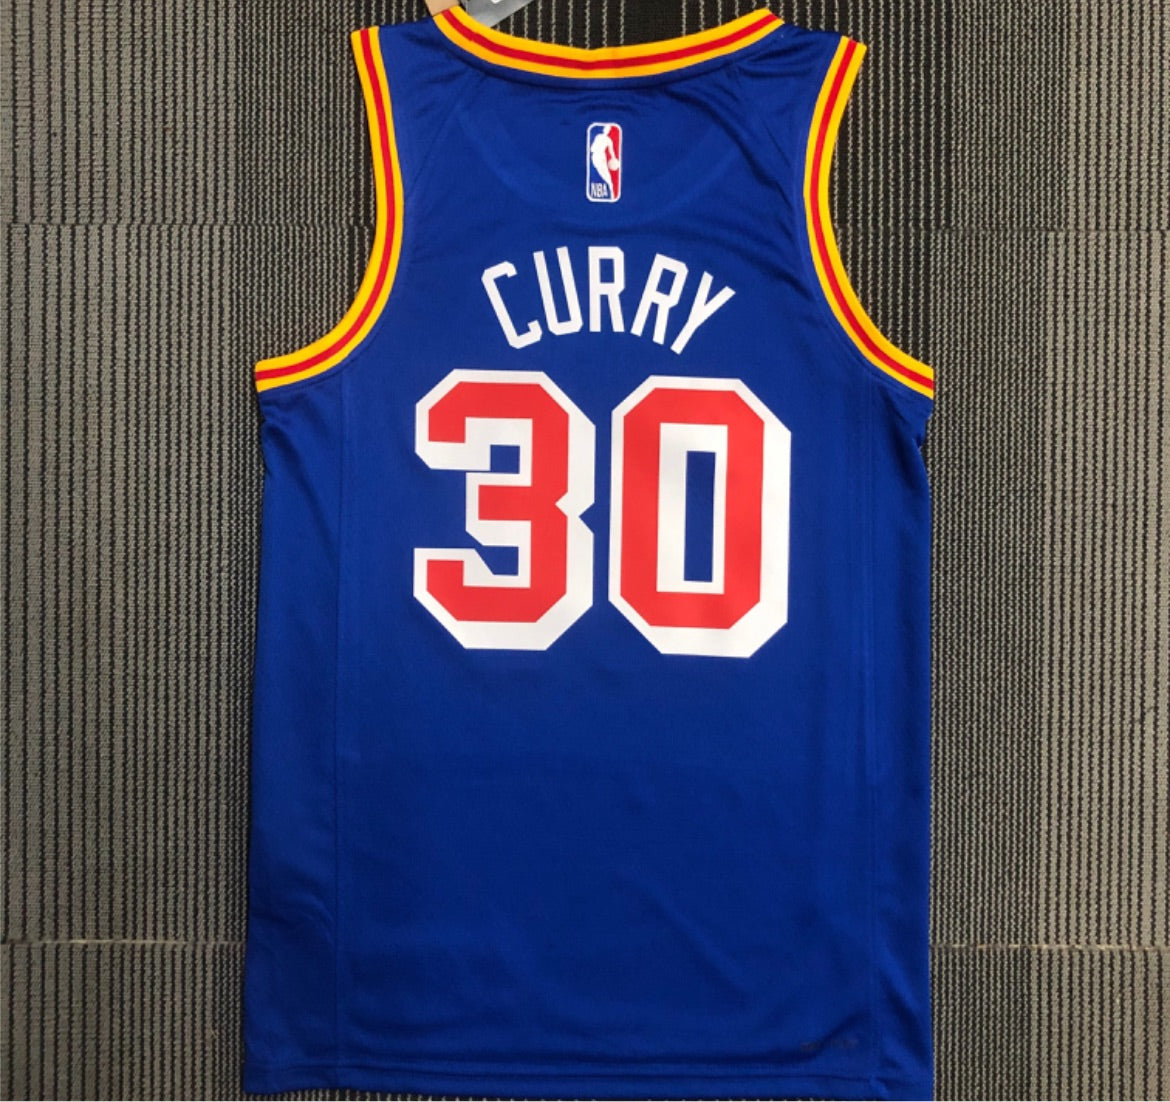 Golden State Warriors Stephen Curry 75th Anniversary Classic